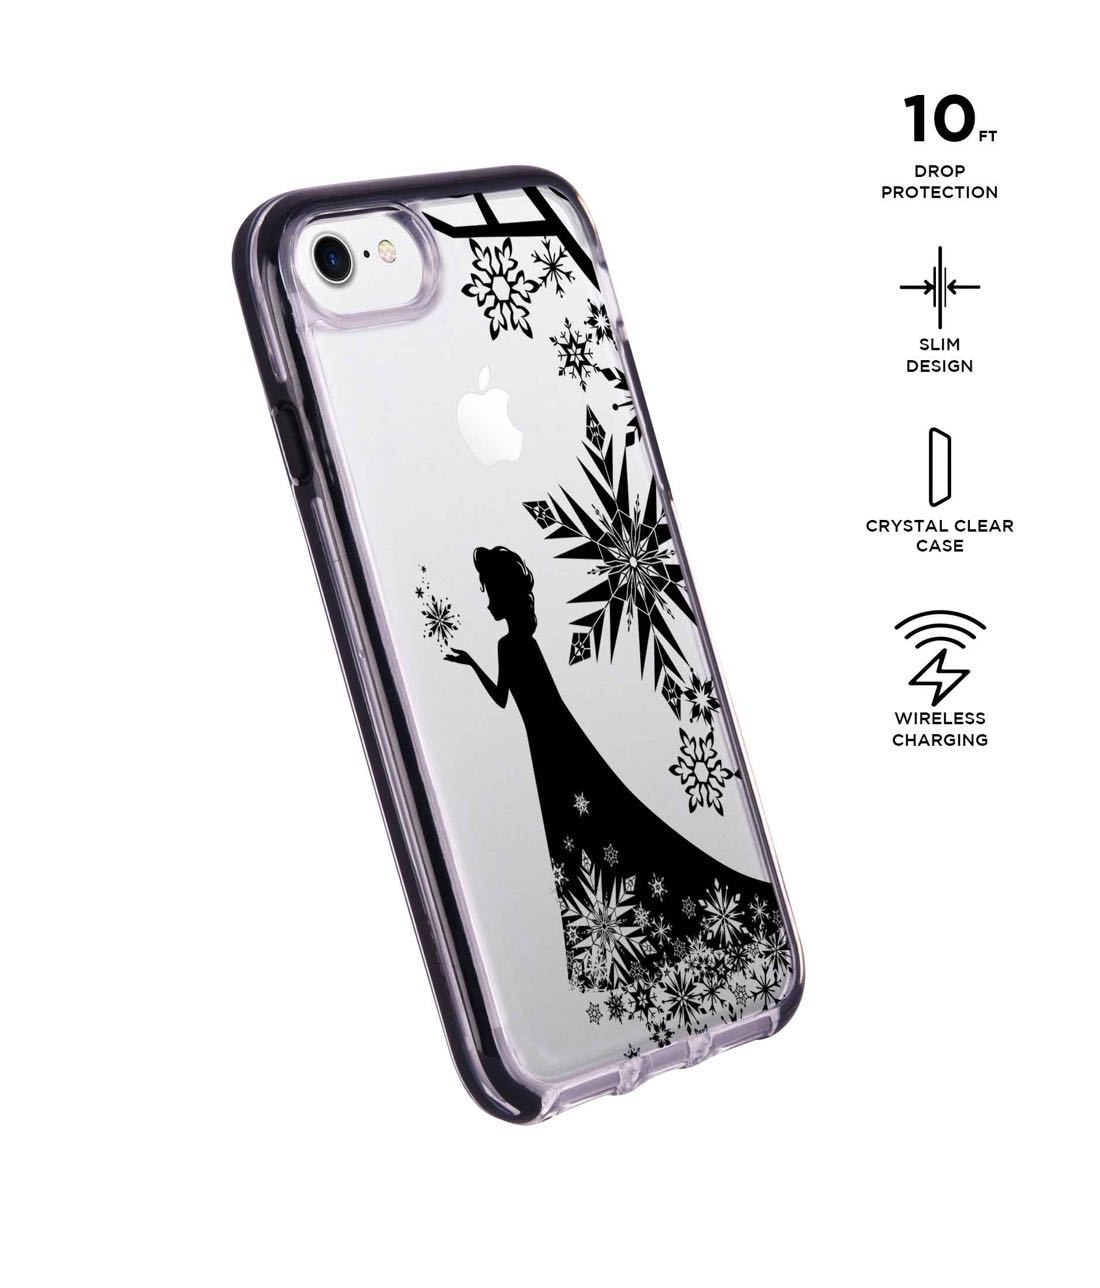 Elsa Silhouette - Extreme Phone Case for iPhone 7